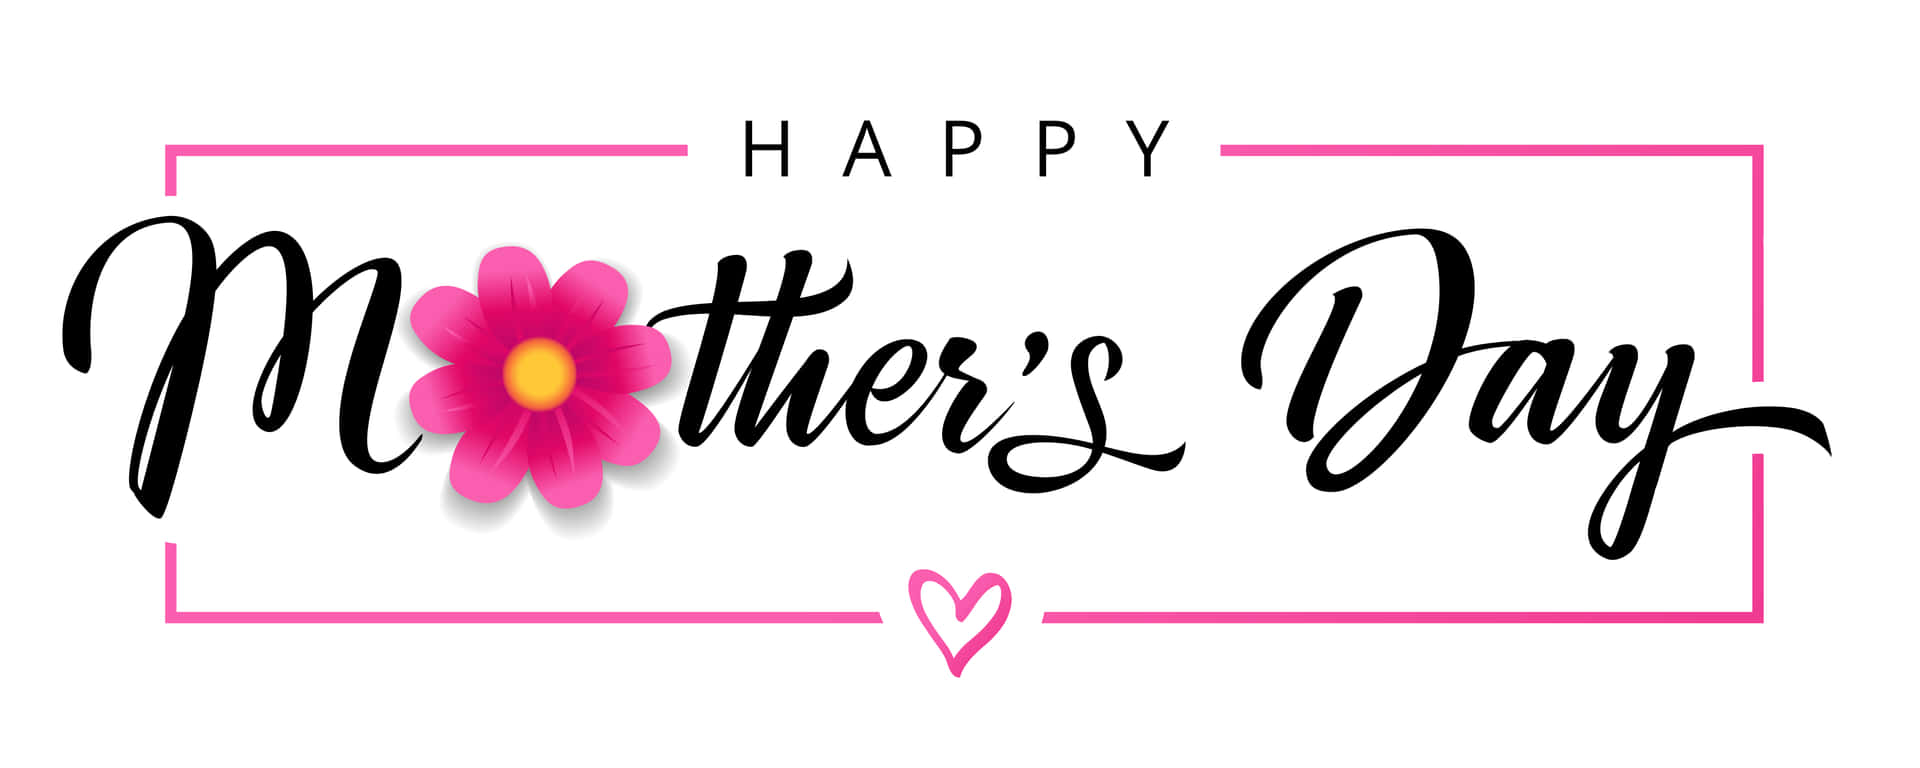 Top 999 Happy Mothers Day Hd Images Amazing Collection Happy Mothers Day Hd Images Full 4k 